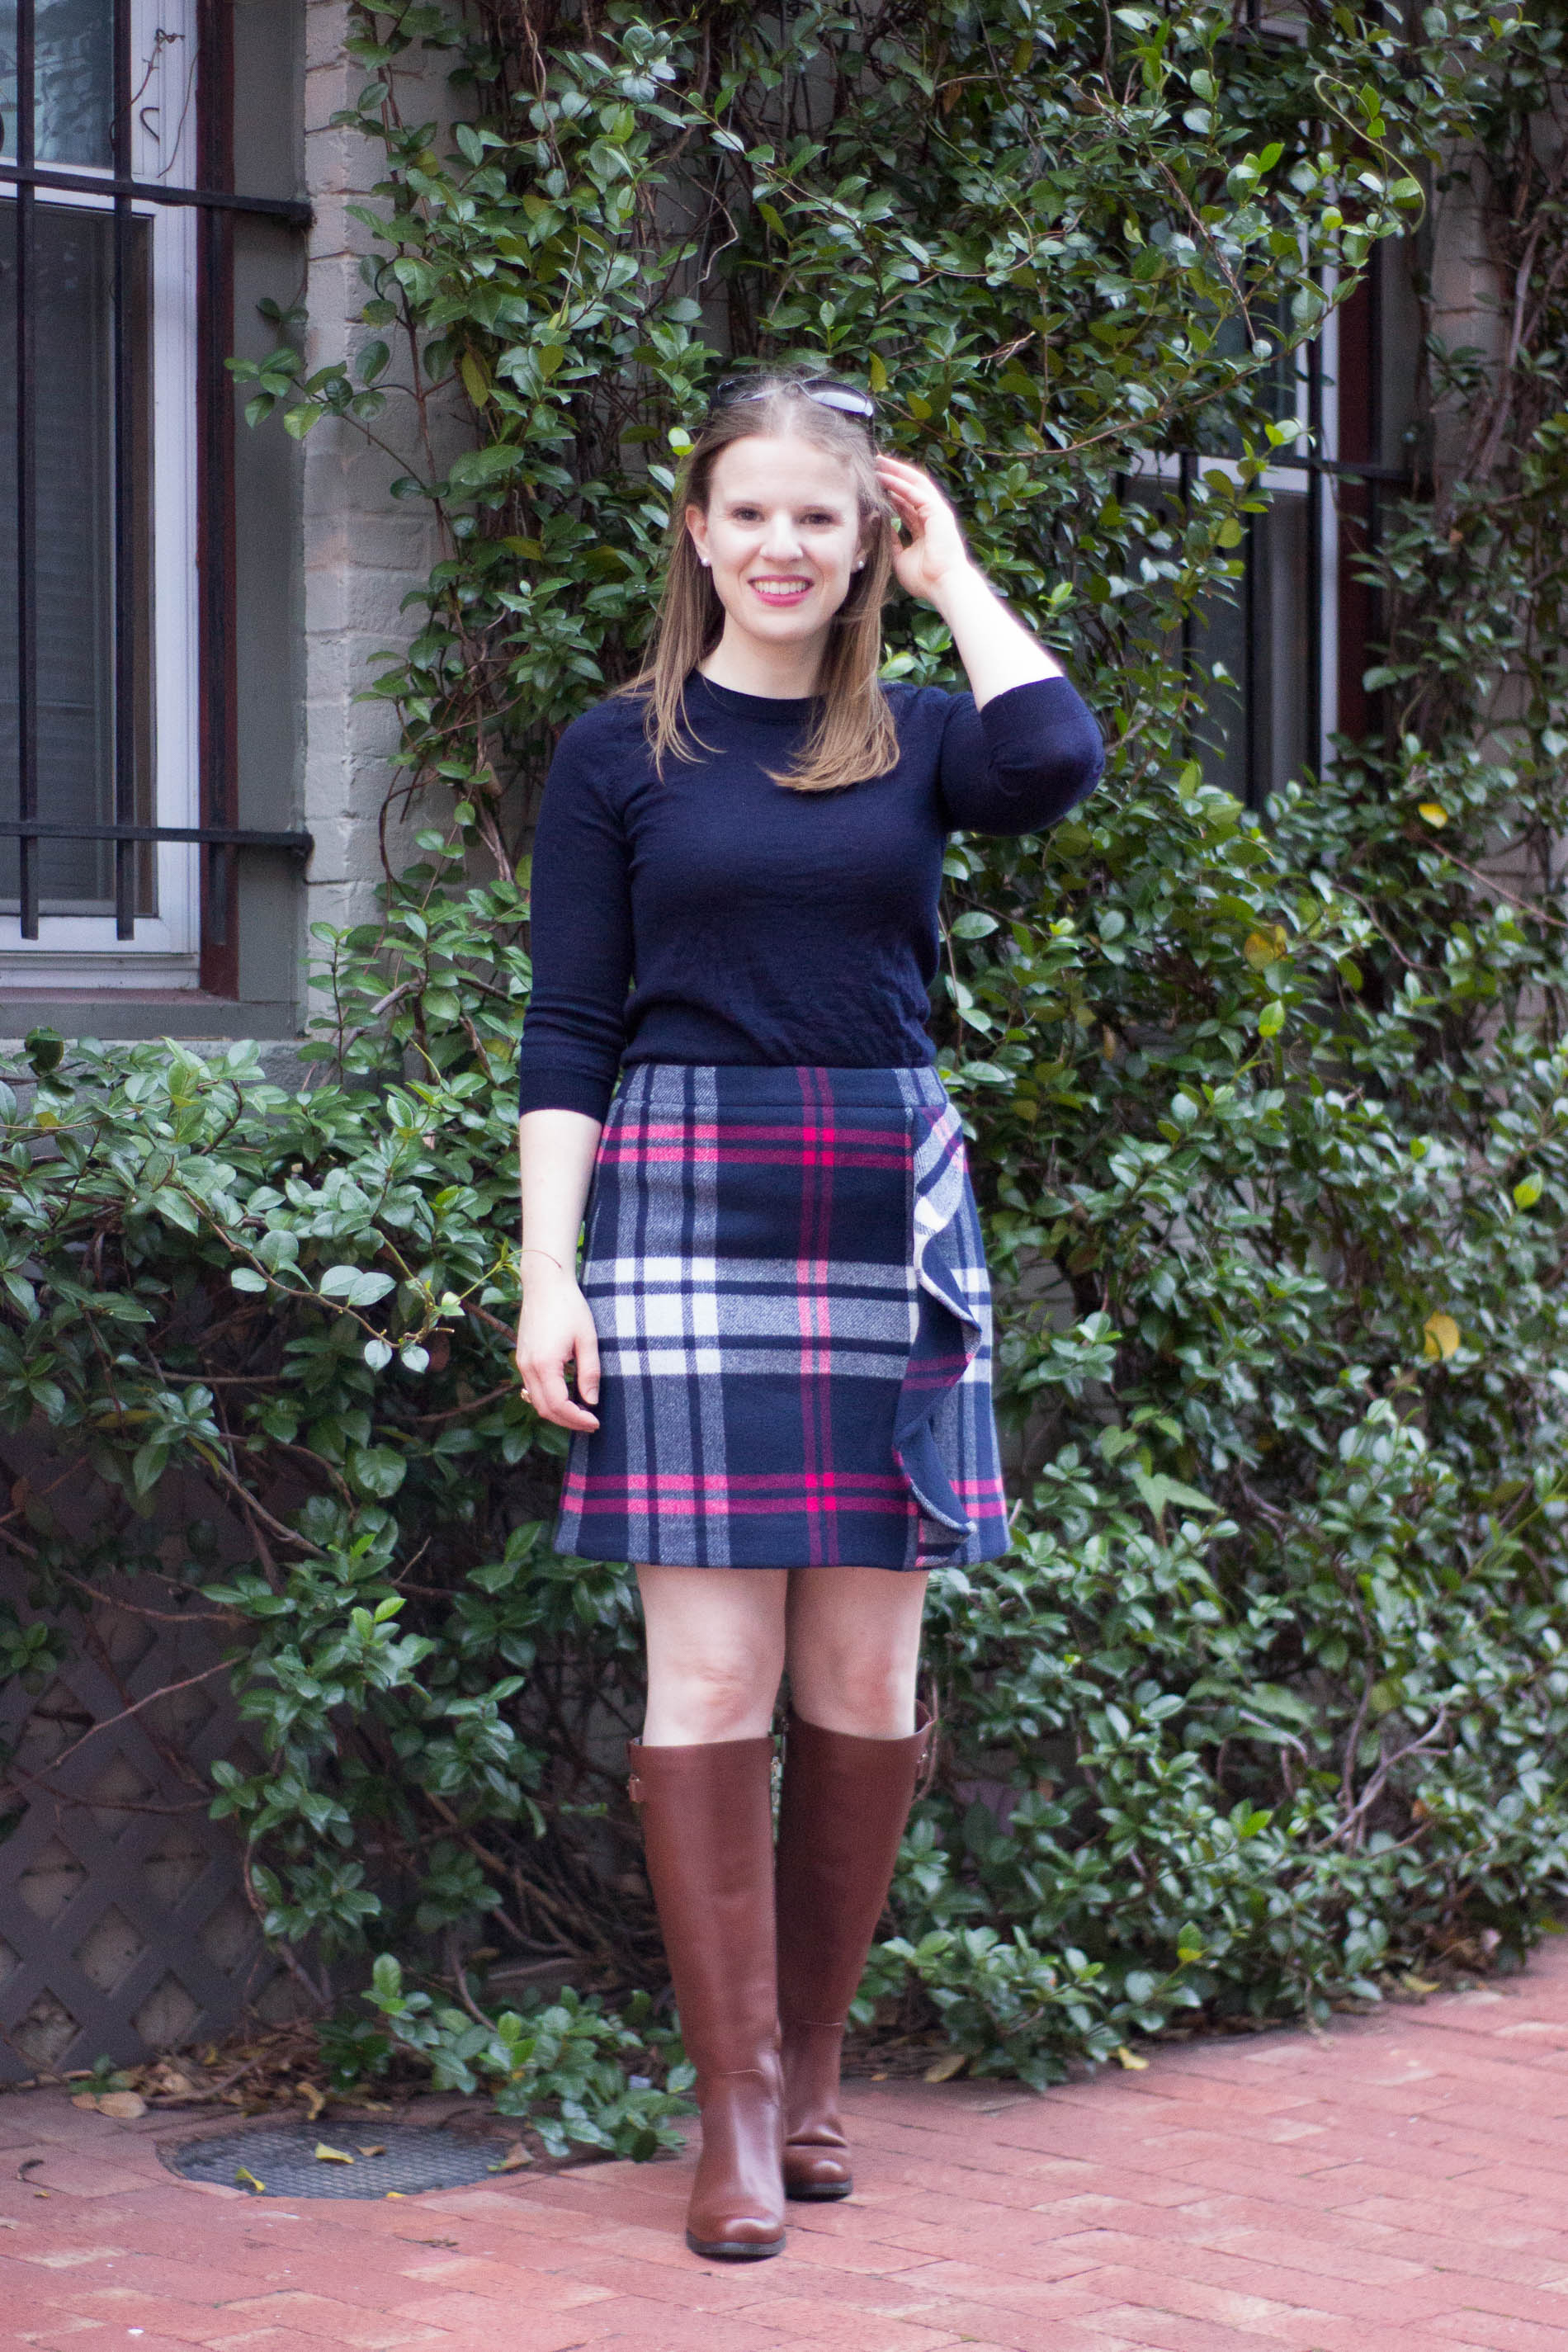 The 5 Days to Holiday Savings Challenge | Something Good, @danaerinw , fall outfit, fall style, women's fashion, women's clothing, women's style, fall clothes, navy sweater, crew neck sweater, riding boots, thanksgiving, thanksgiving outfit, workoutfit, plaid skirt outfit, skirts, women's skirt, brown boots